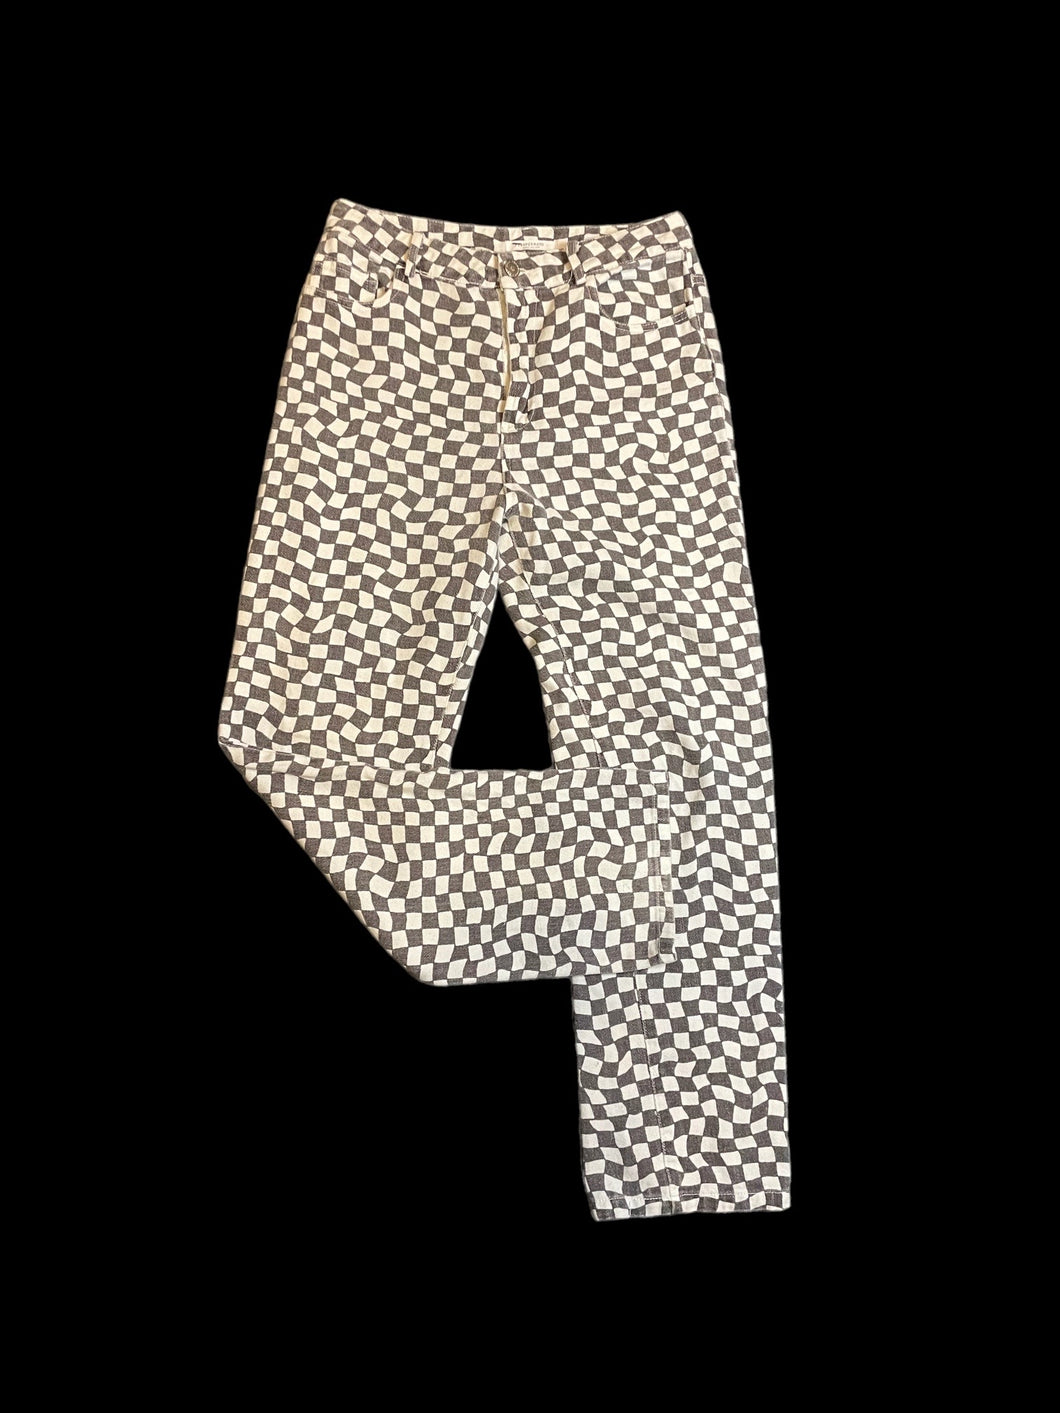 XS White & olive green wavy checkered pattern high waisted pants w/ pockets, belt loops, & zipper/button closure